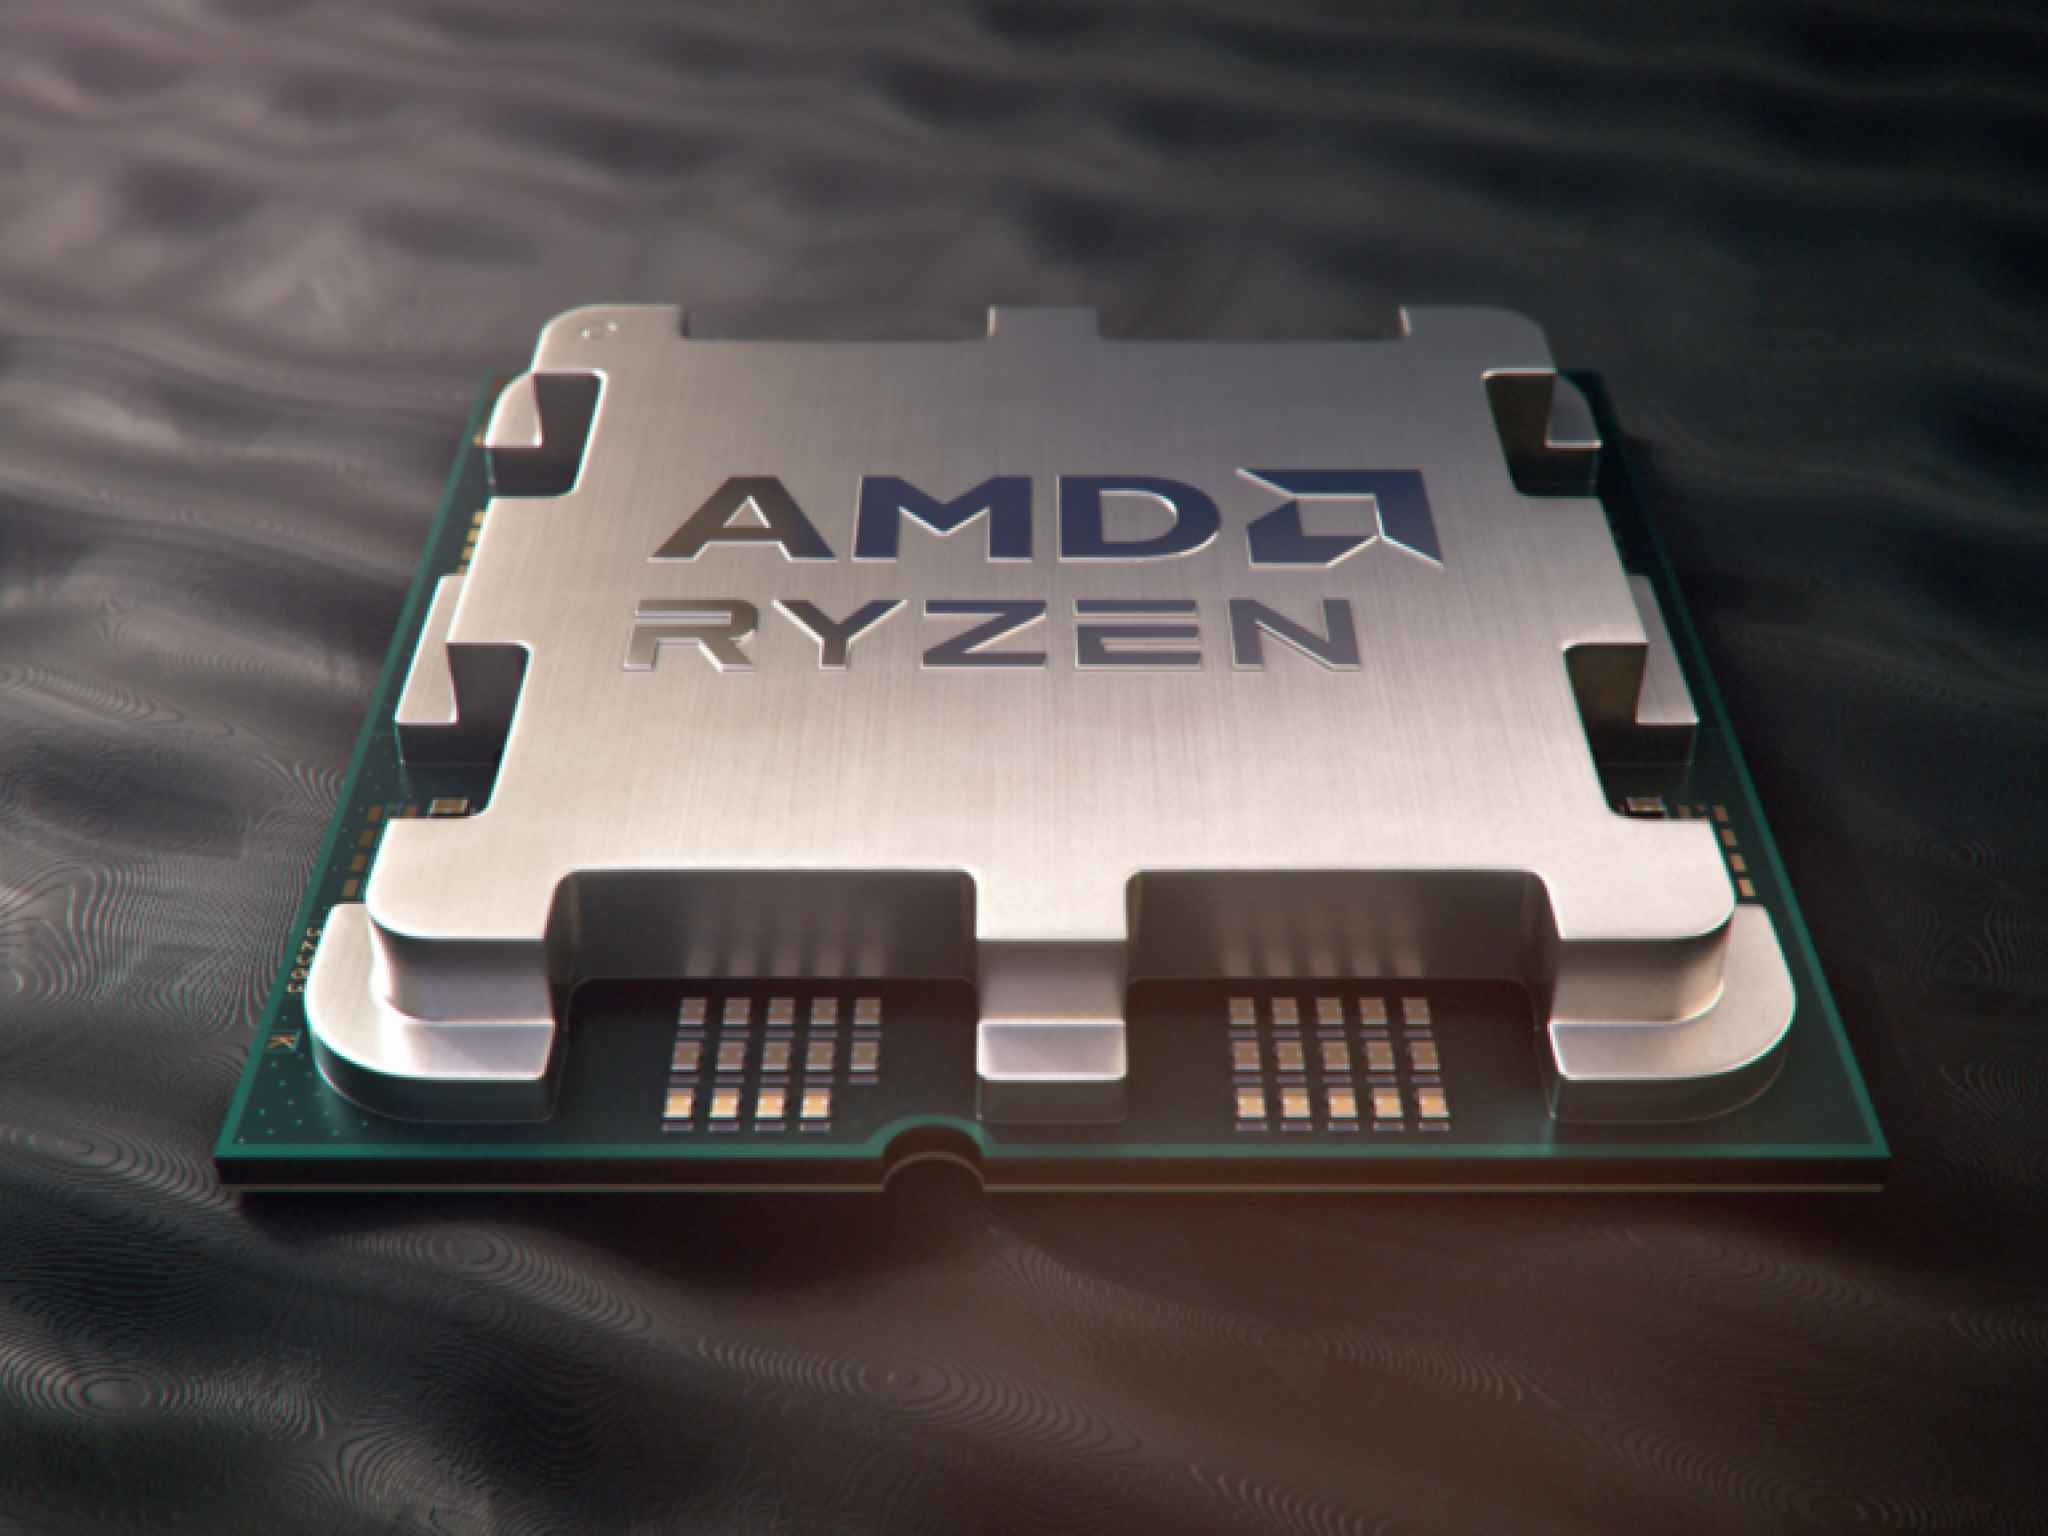  amd-stock-is-rising-wednesday-after-the-bell-whats-going-on 